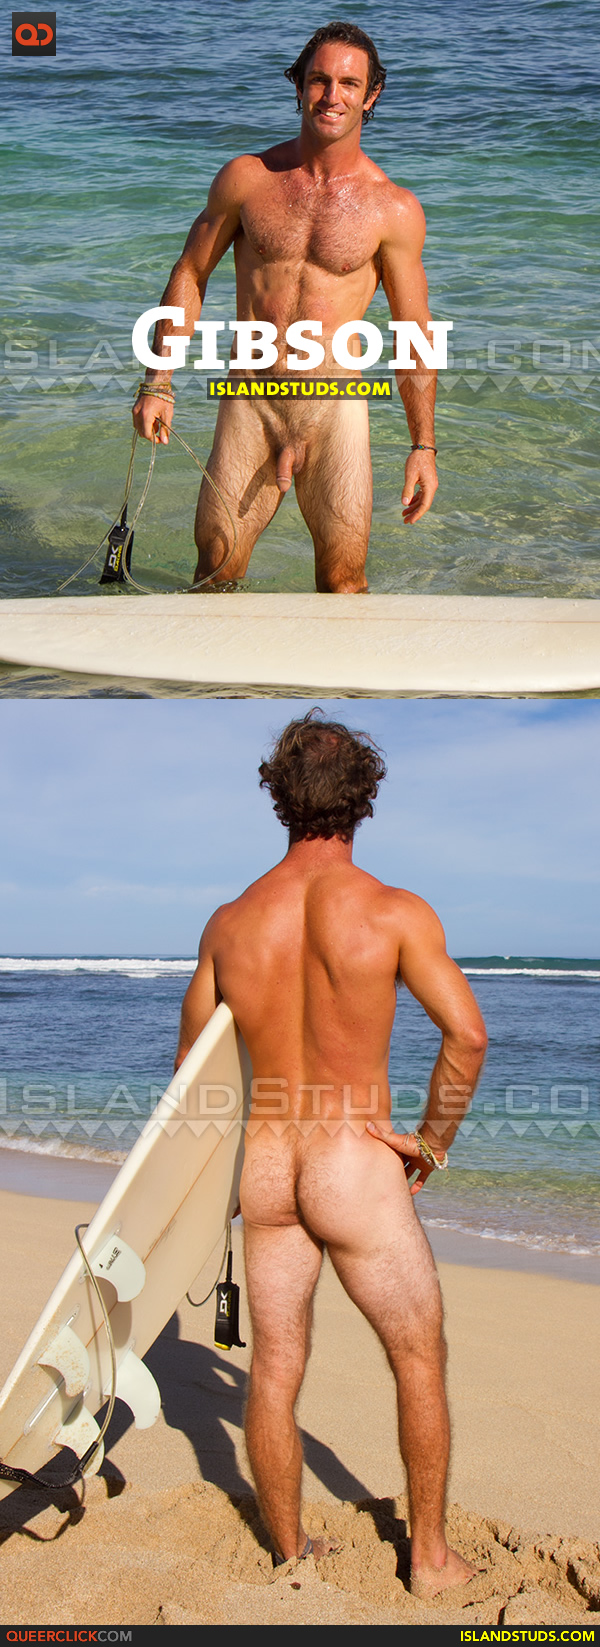 Island Studs: Surfer Gibson is BACK!